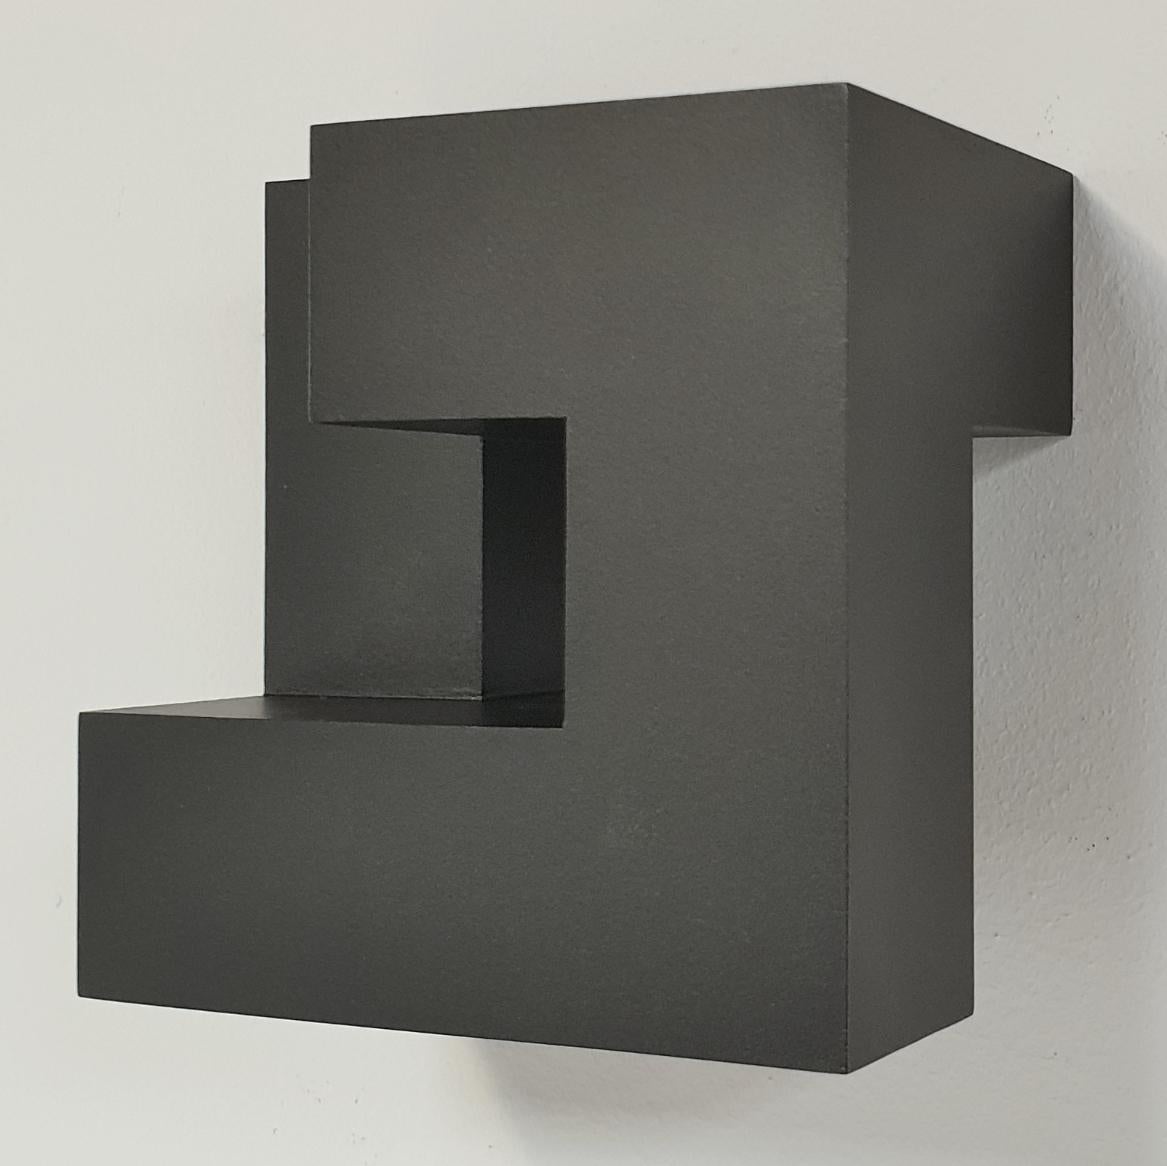 Olivier Julia Abstract Sculpture - Carré architectural III no. 5/15 - contemporary modern abstract wall sculpture